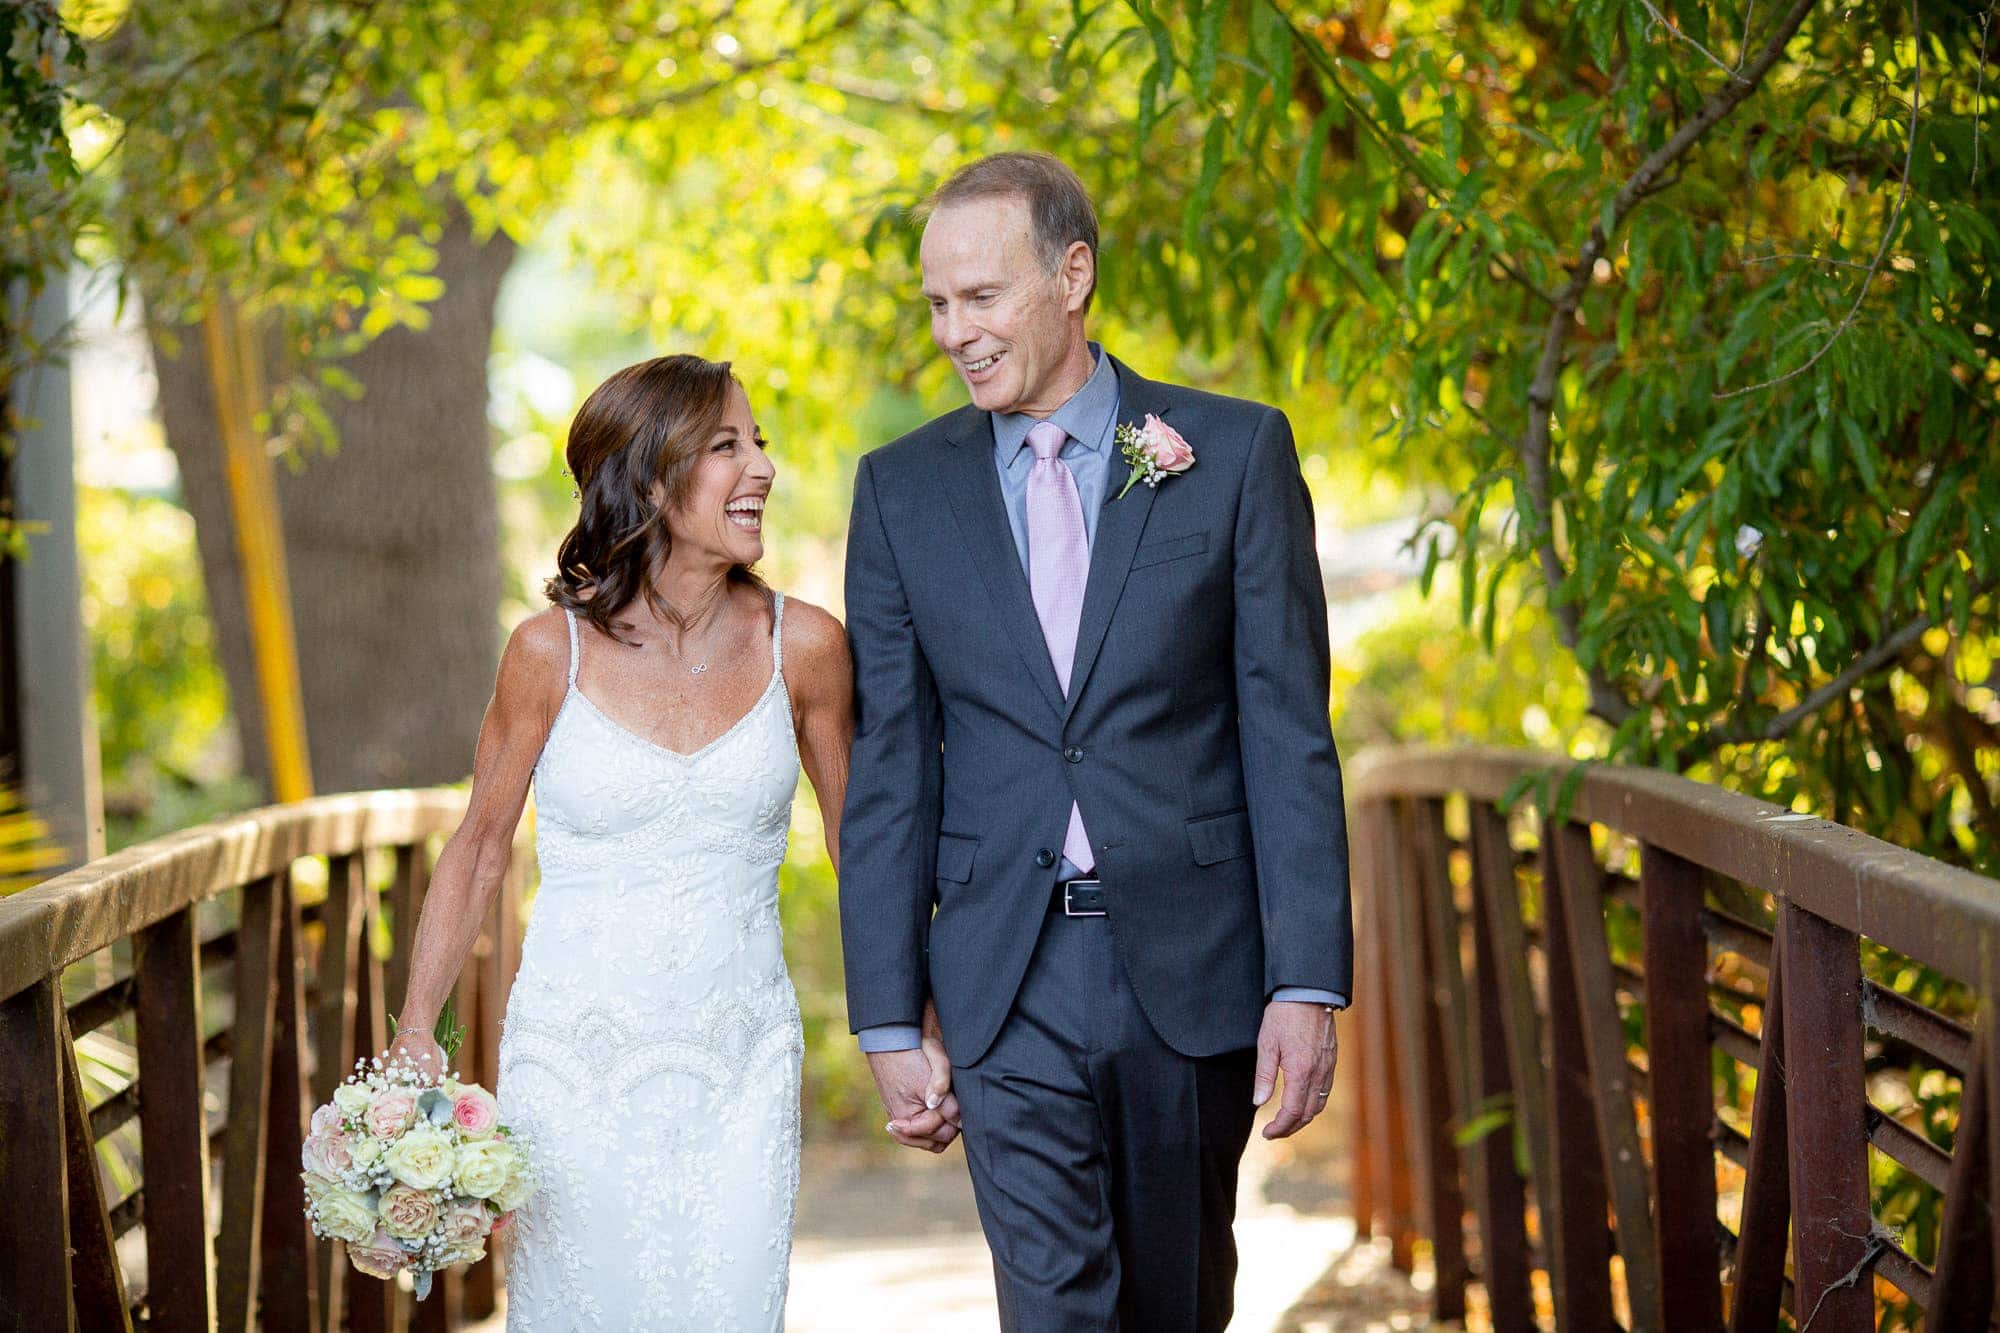 Intimate wedding bride and groom photos on wooden bridge at Hotel Yountville